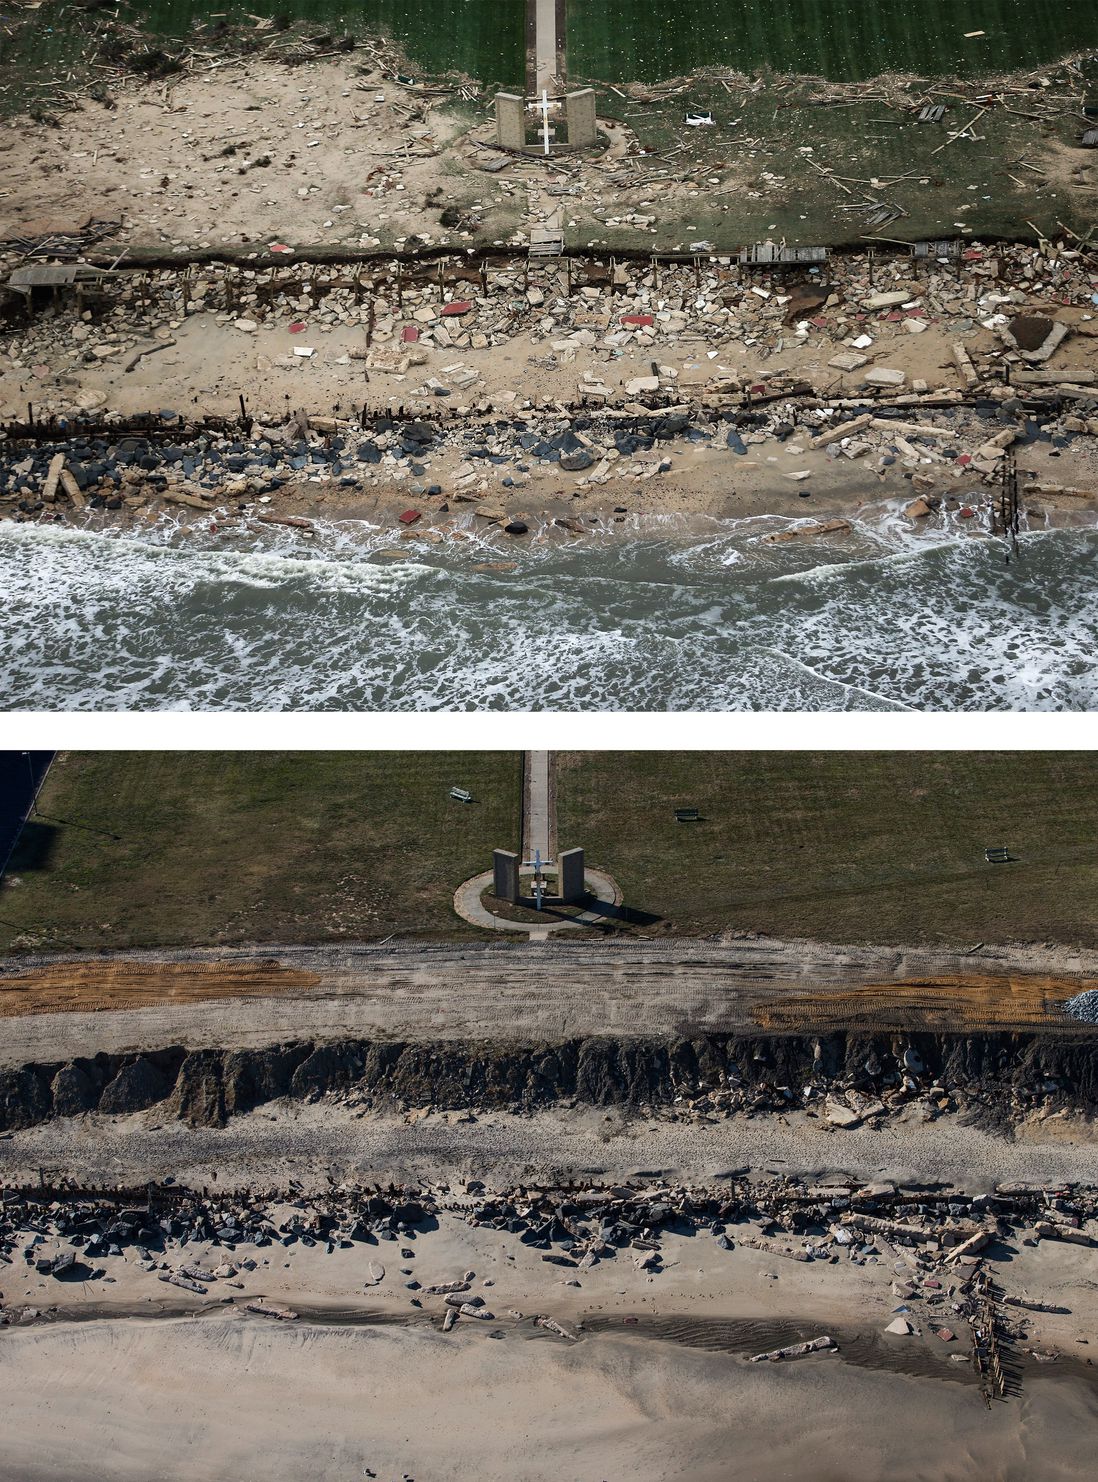 [Top] A church cross stands amid wreckage from Superstorm Sandy at the edge of the Atlantic Ocean on October 31, 2012 in Long Branch, New Jersey. [Bottom] The cross is shown October 21, 2013 in Long Branch, New Jersey.